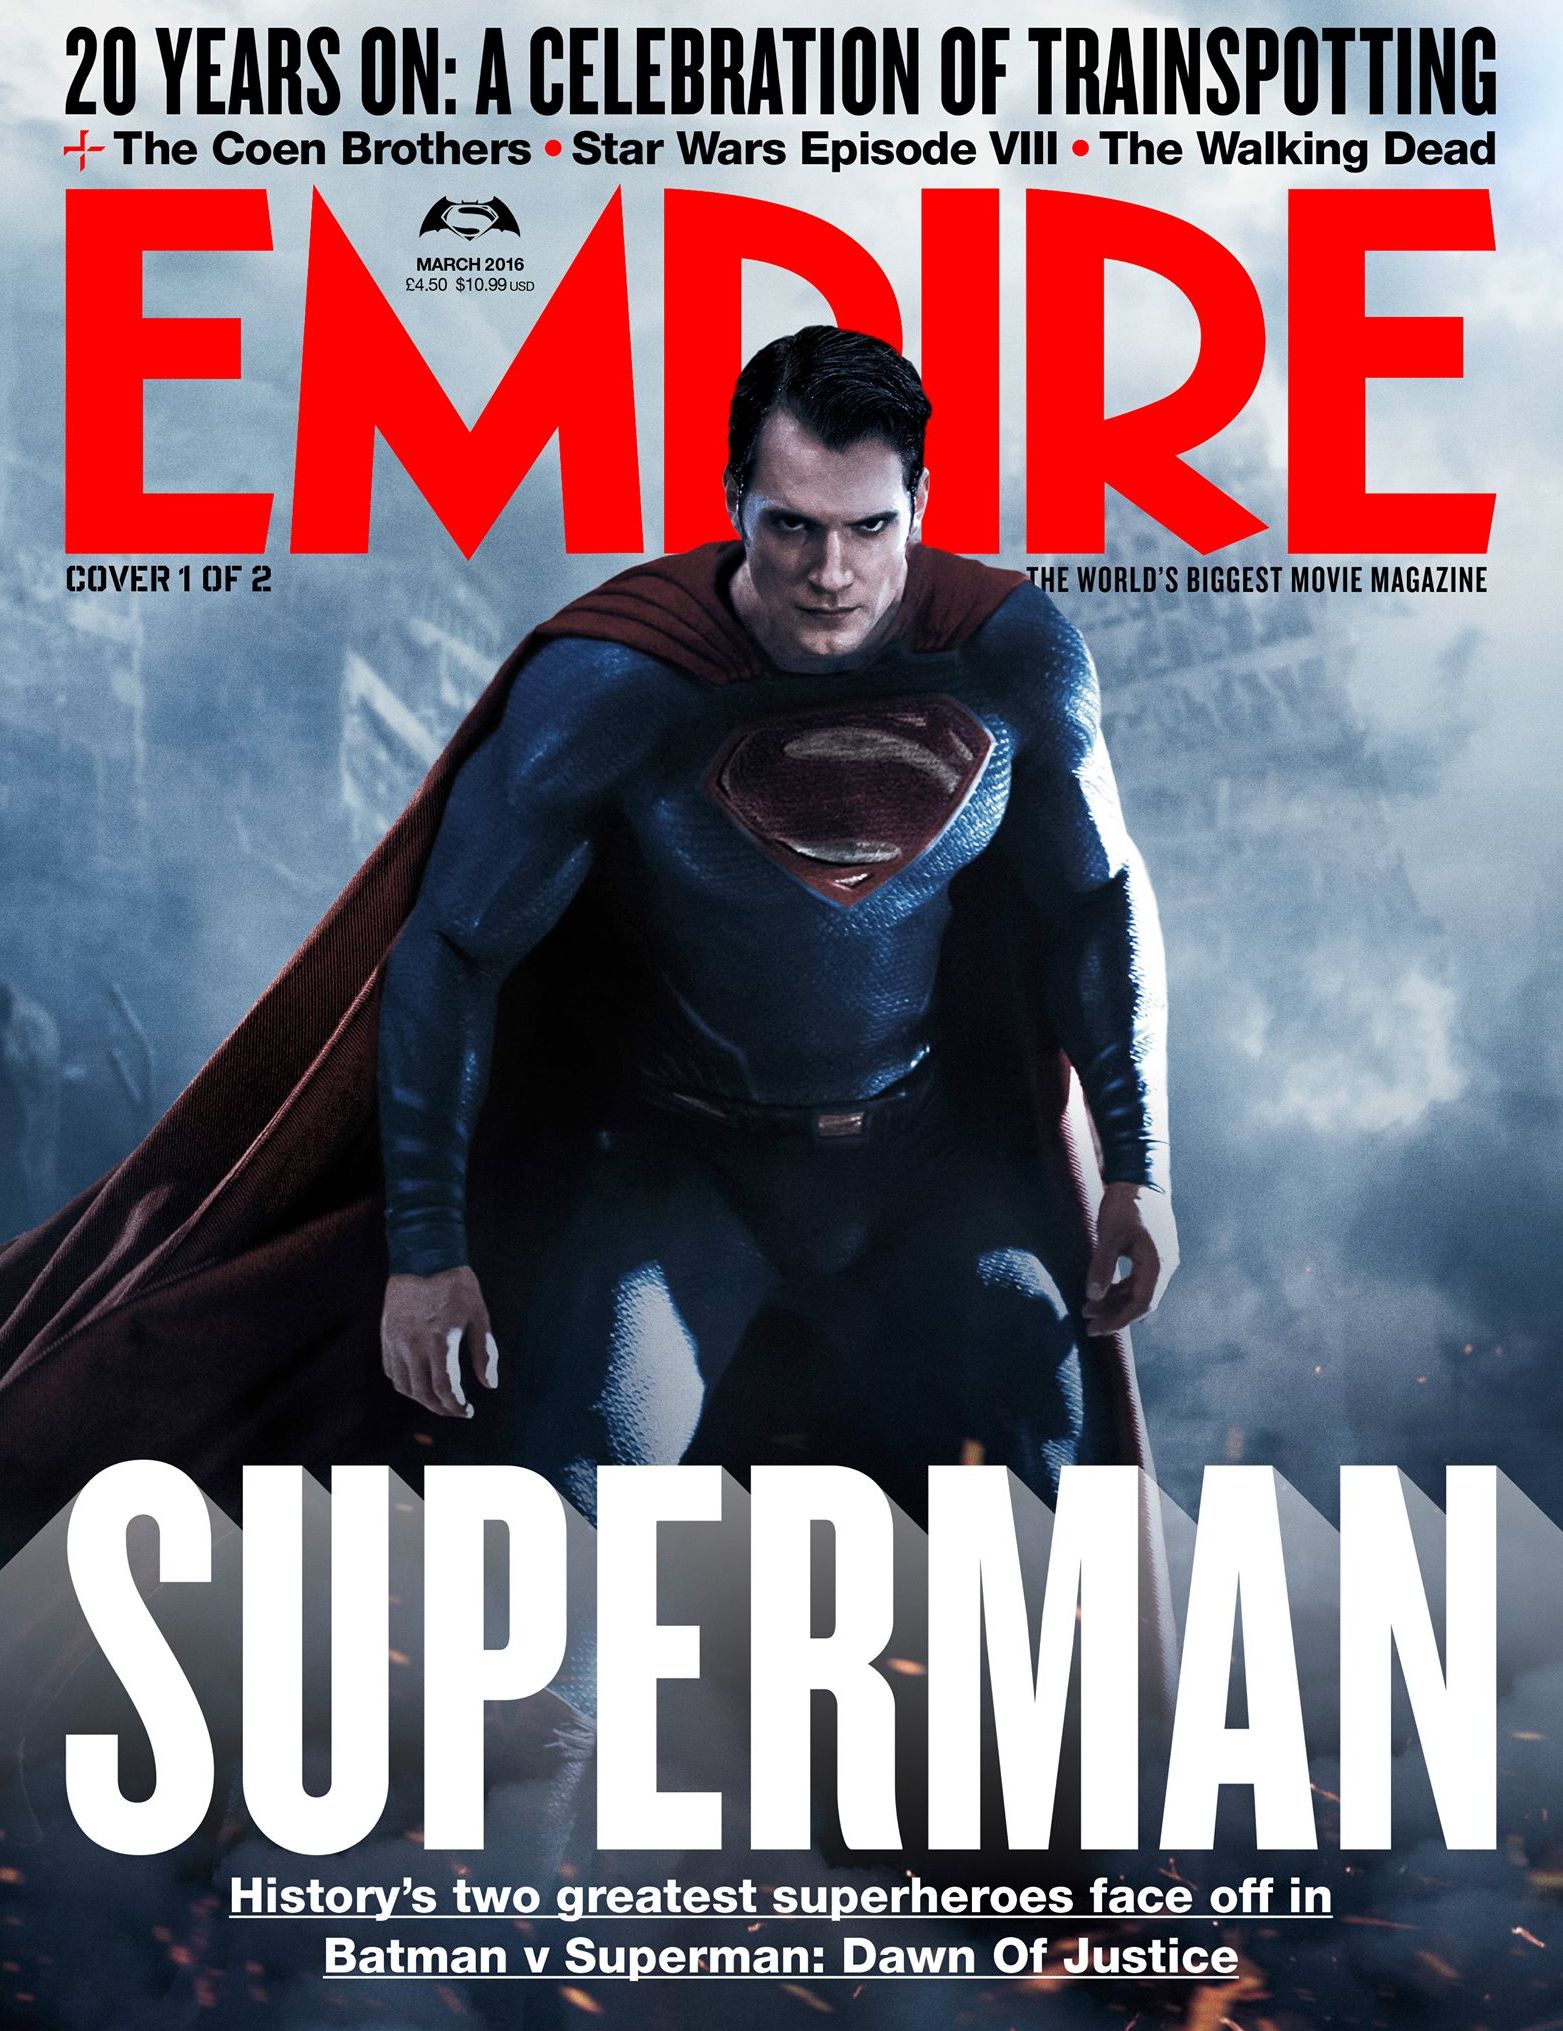 New Empire Magazine Cover Features the Man of Steel